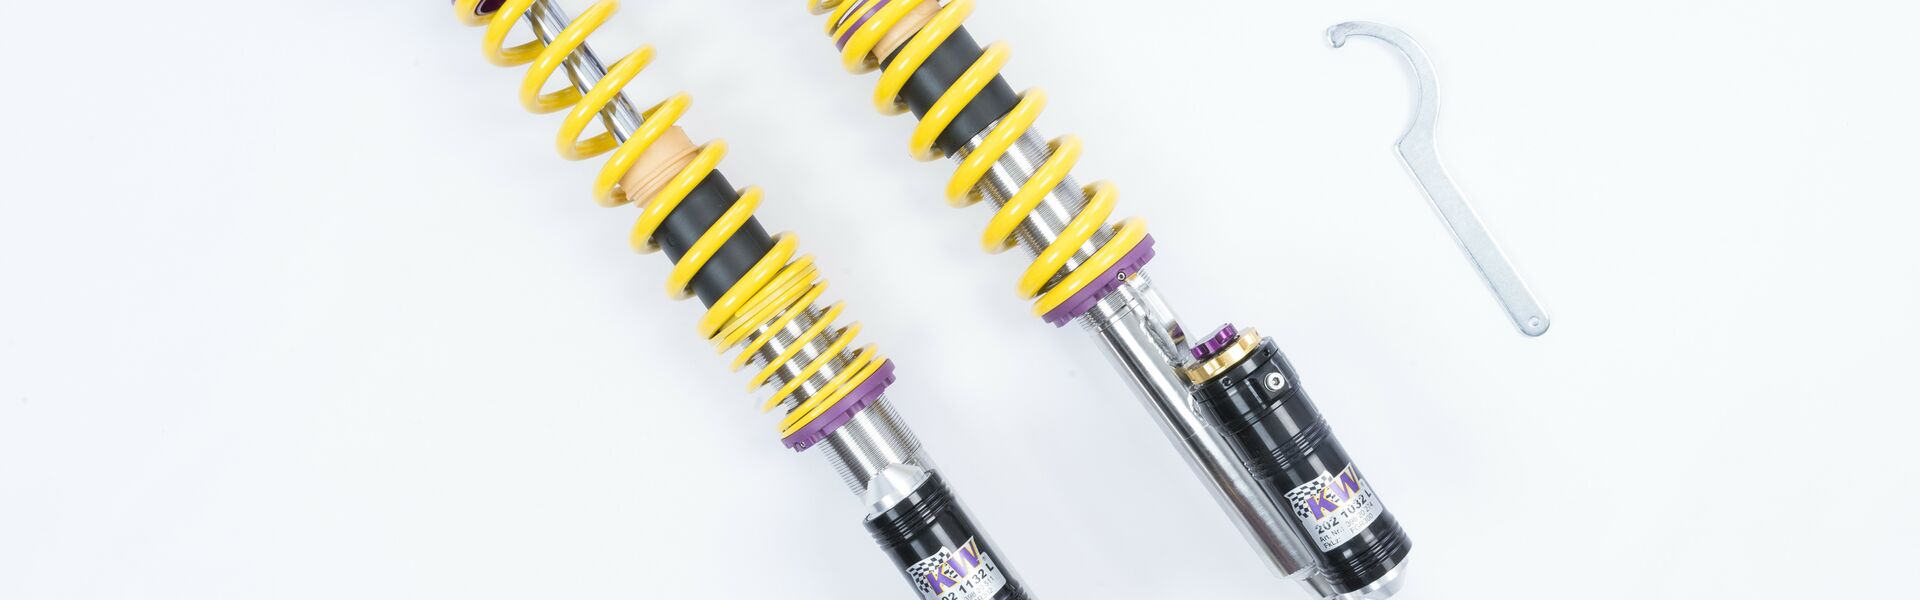 KW COILOVER KIT VARIANT 4 ALUMINIUM ( INCL. DEACTIVATION FOR ELECTRONIC DAMPER)